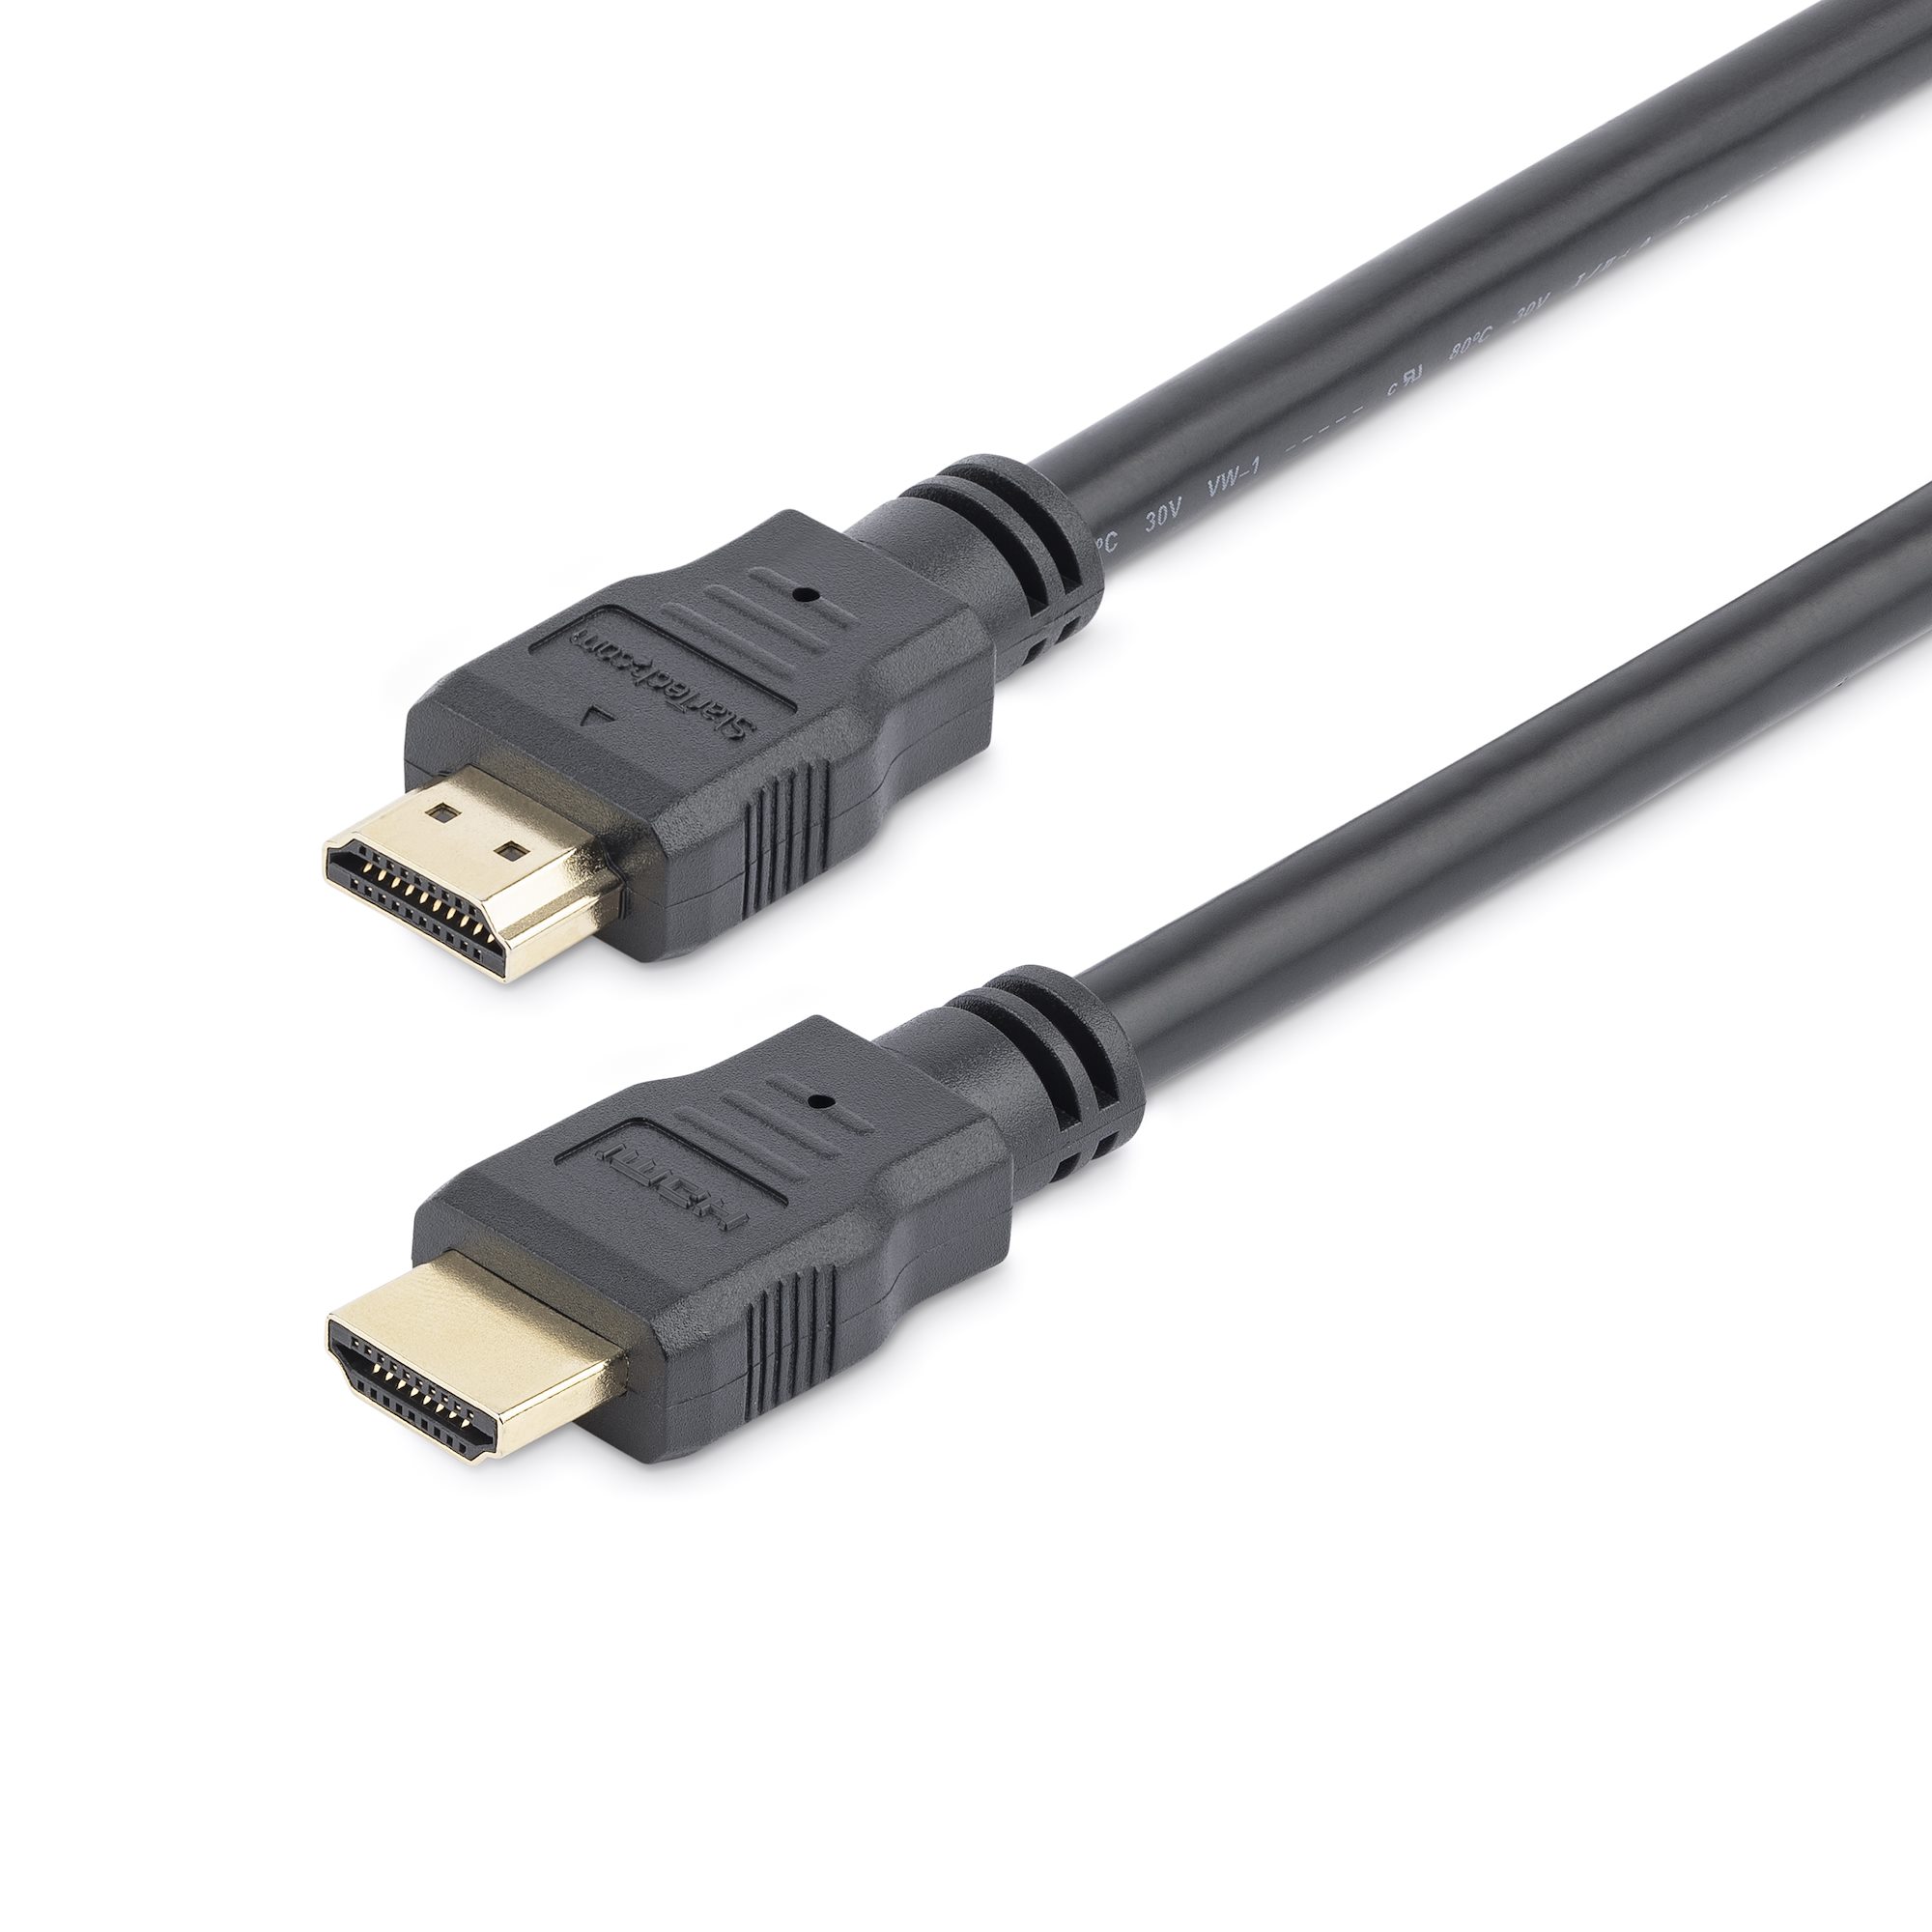 HDMI Cable Ultra 4K Gold Plated 2 3 5 10 Meter Ethernet High Speed 3D Gold 5m 2m 